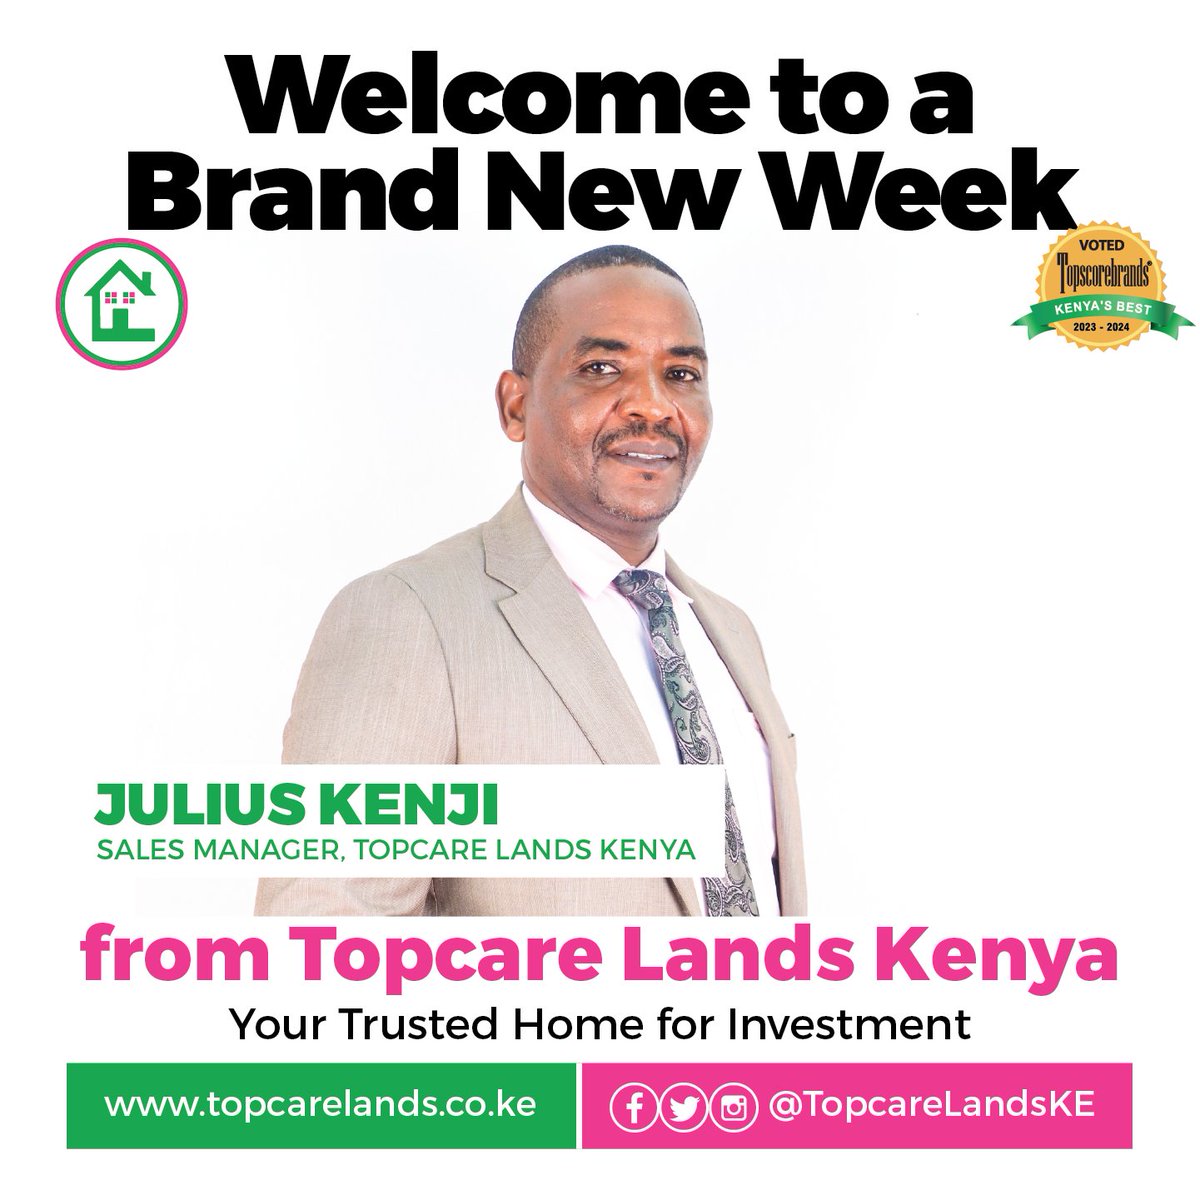 Here is to a brand new week at Topcare Lands Kenya from our Sales Manager, Ruai Branch, Julius Kenji. We are your Trusted home for Investment.
#BuiltOnTrust #topcaredelivers